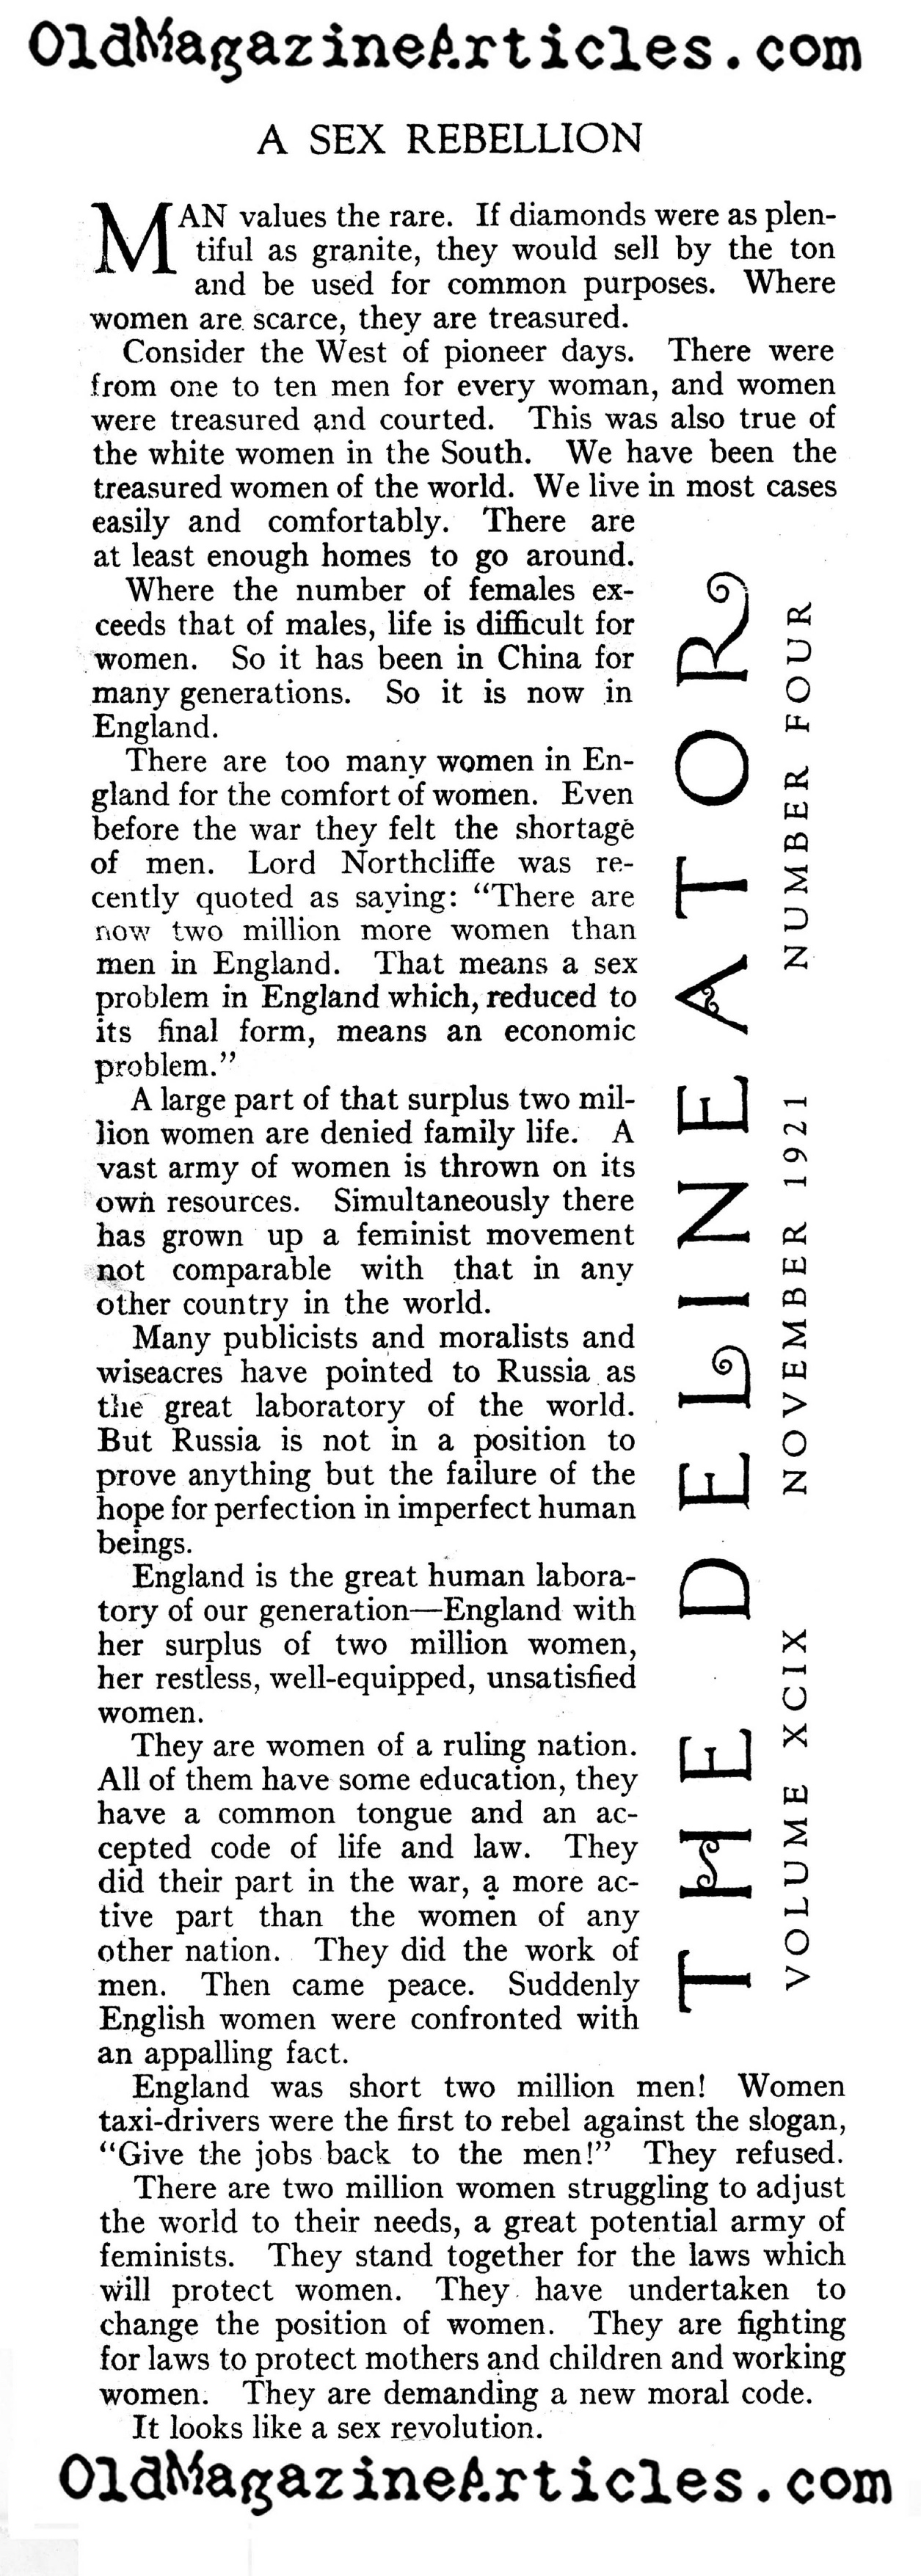 Two Million Dead Men and the Advance of Feminism (Delineator Magazine, 1921)